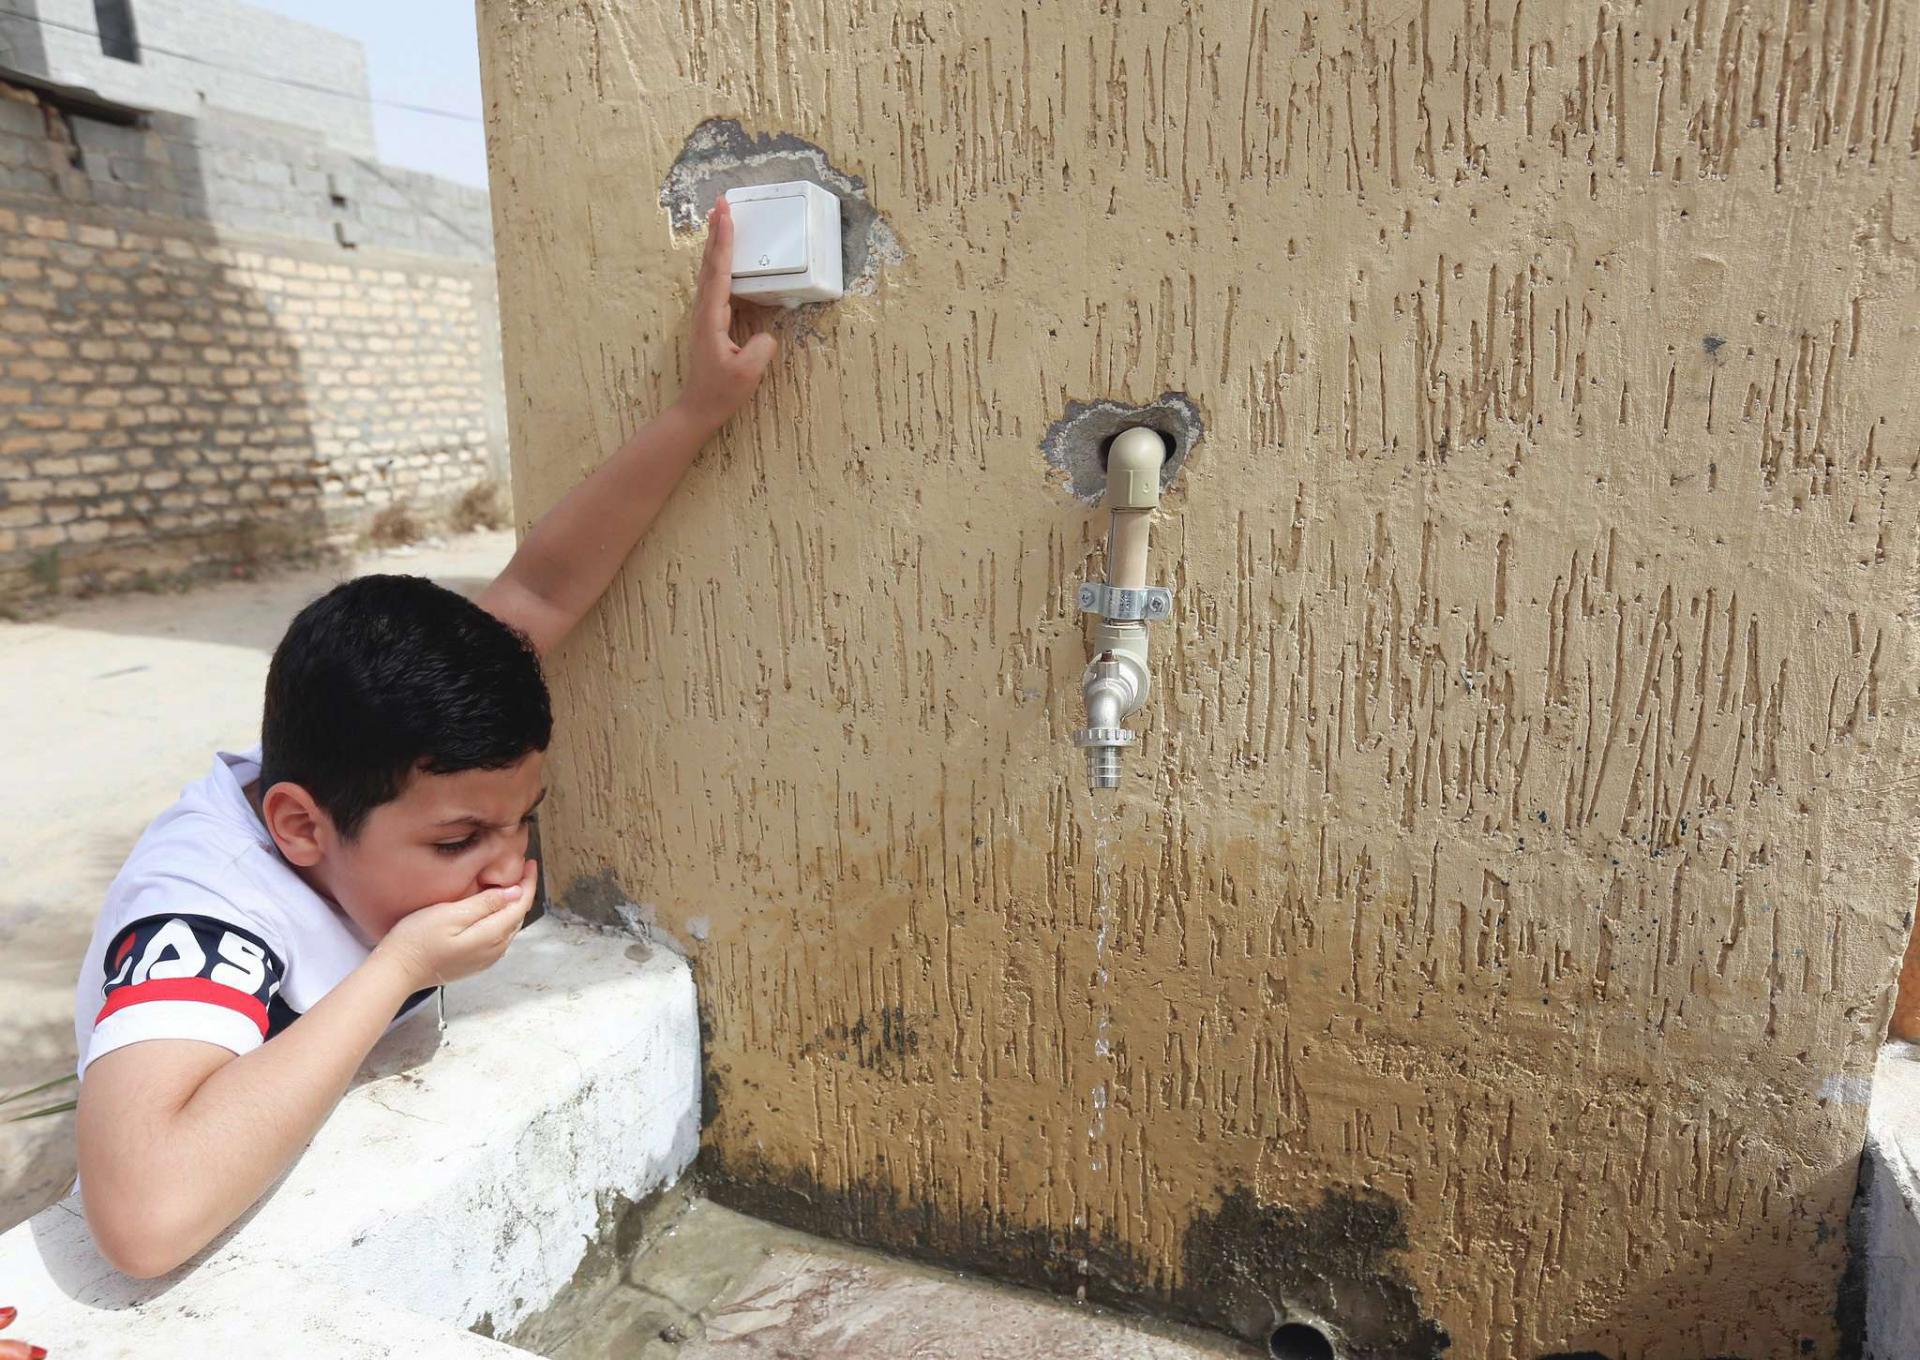 A boy drinks water during a water shortage in Tripoli, Libya